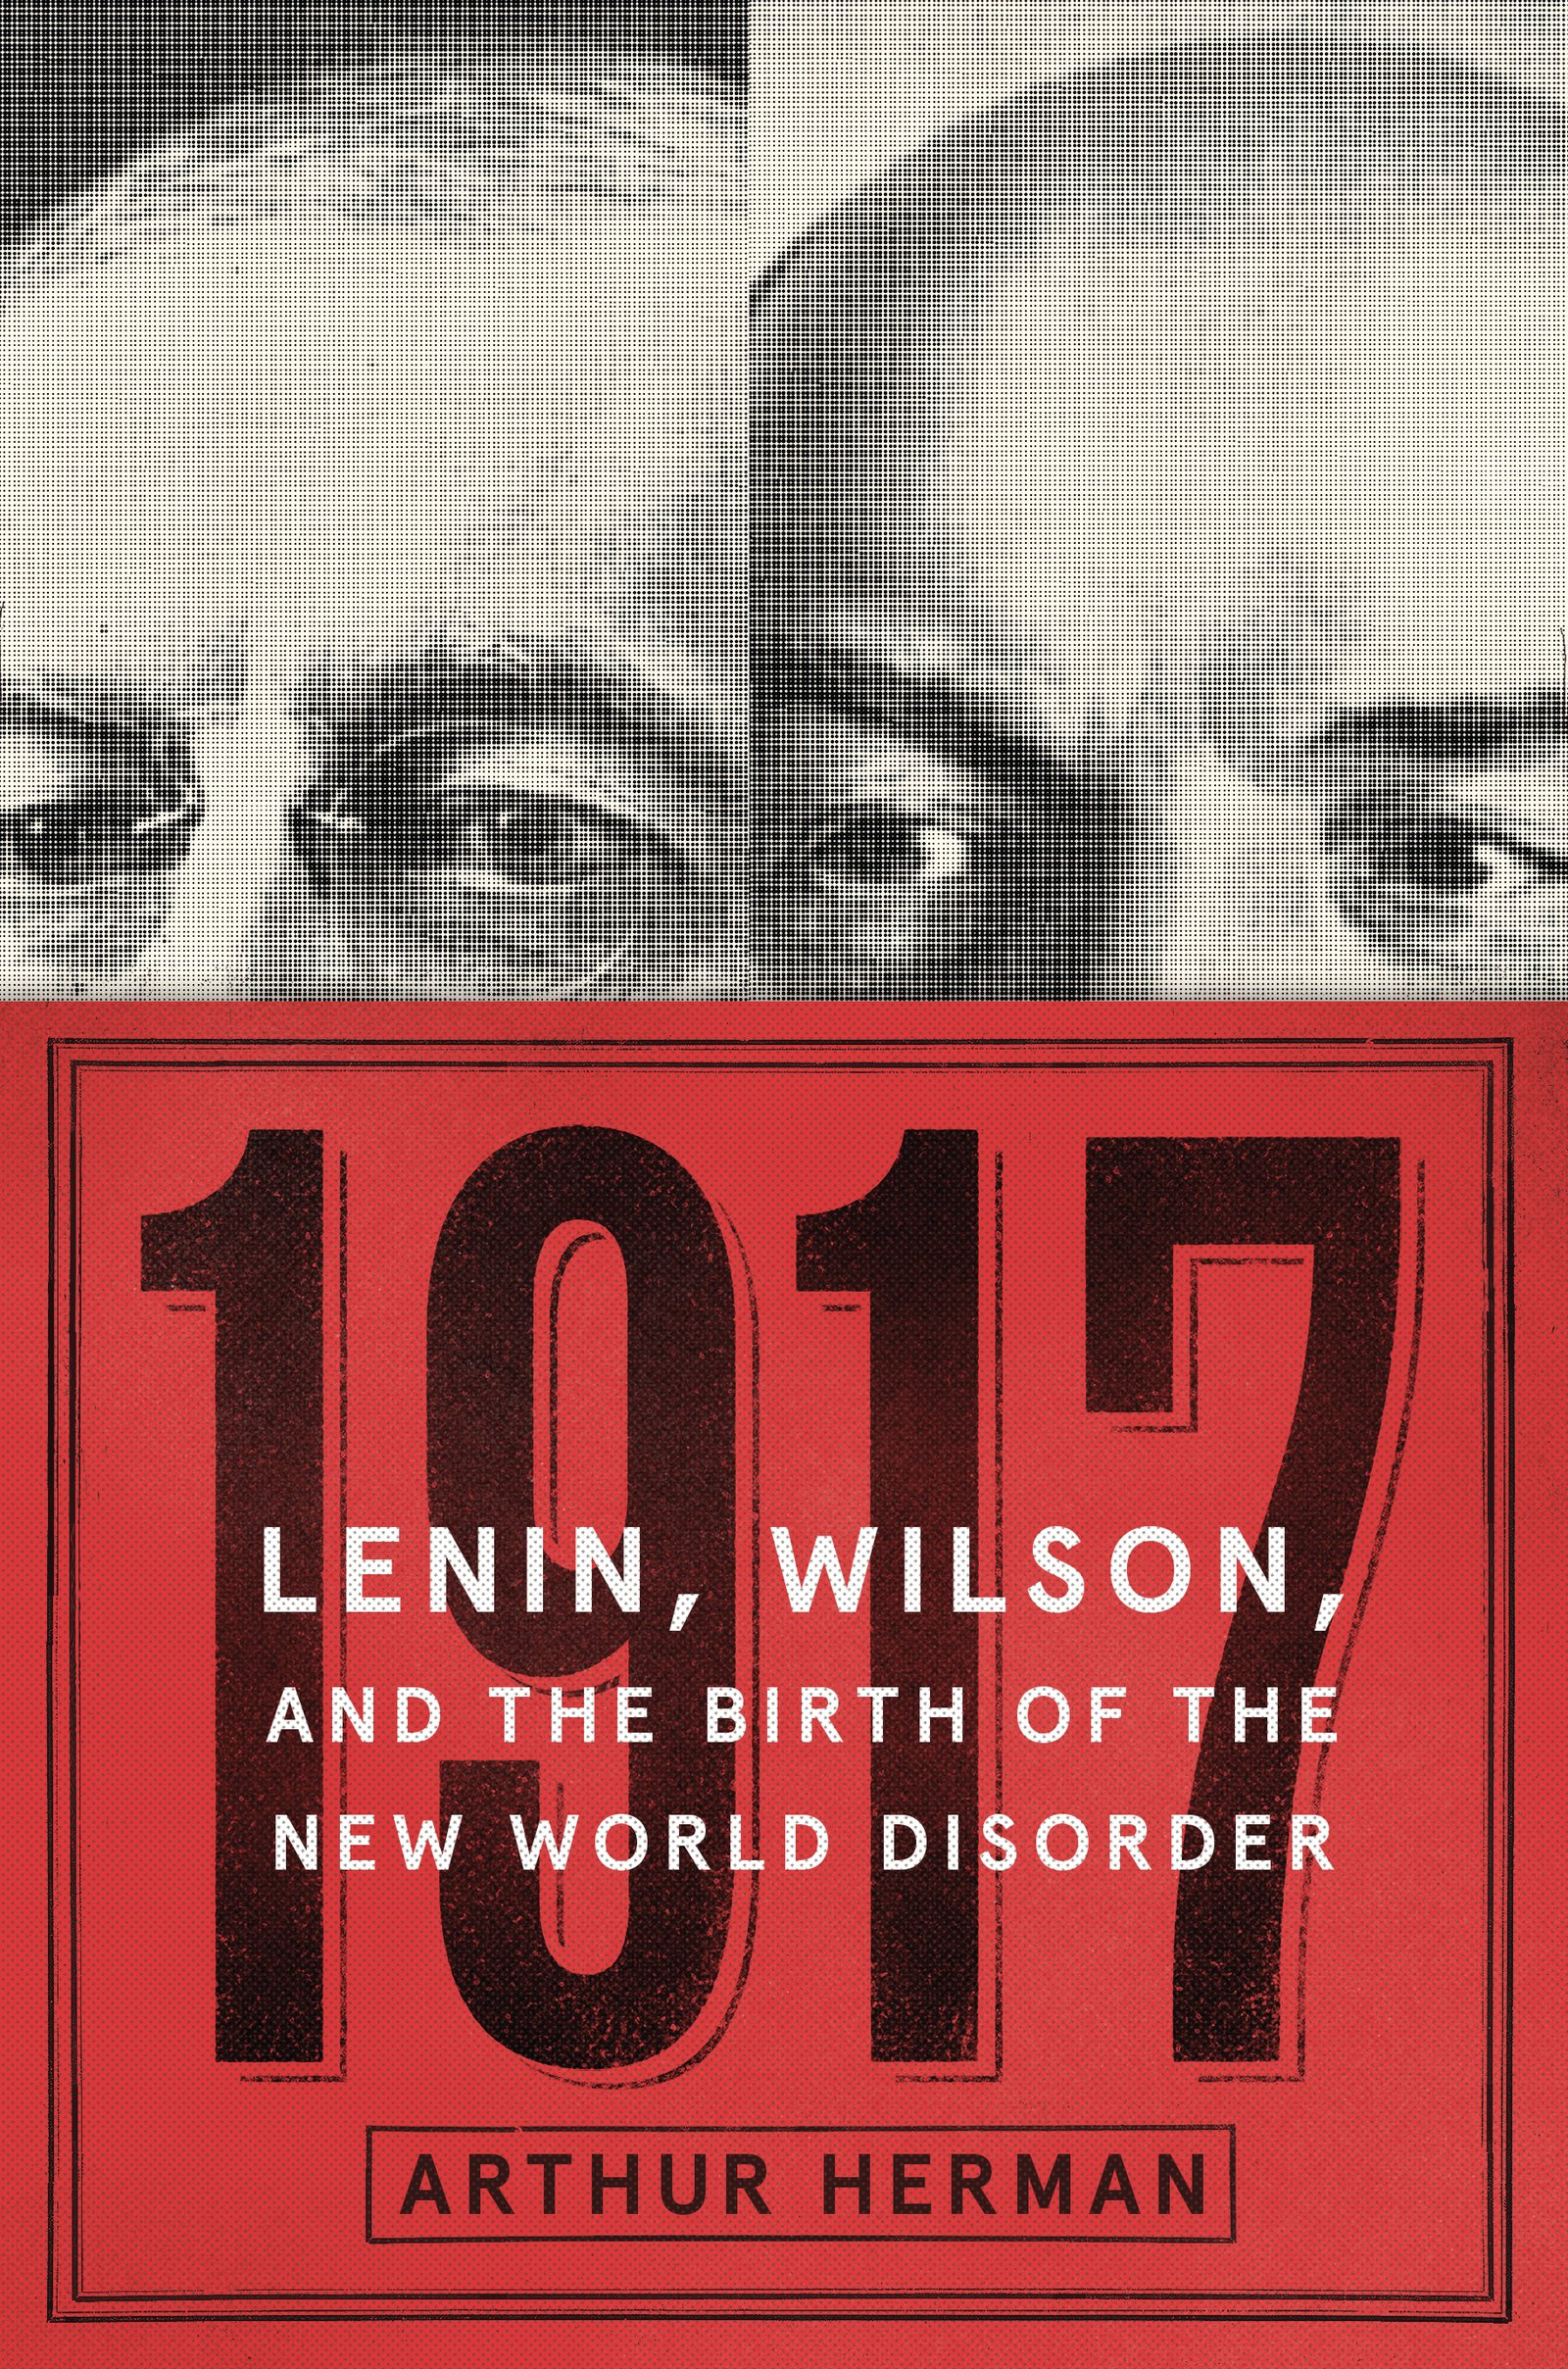 Book Cover 1917: Lenin, Wilson, and the Birth of the New World Disorder